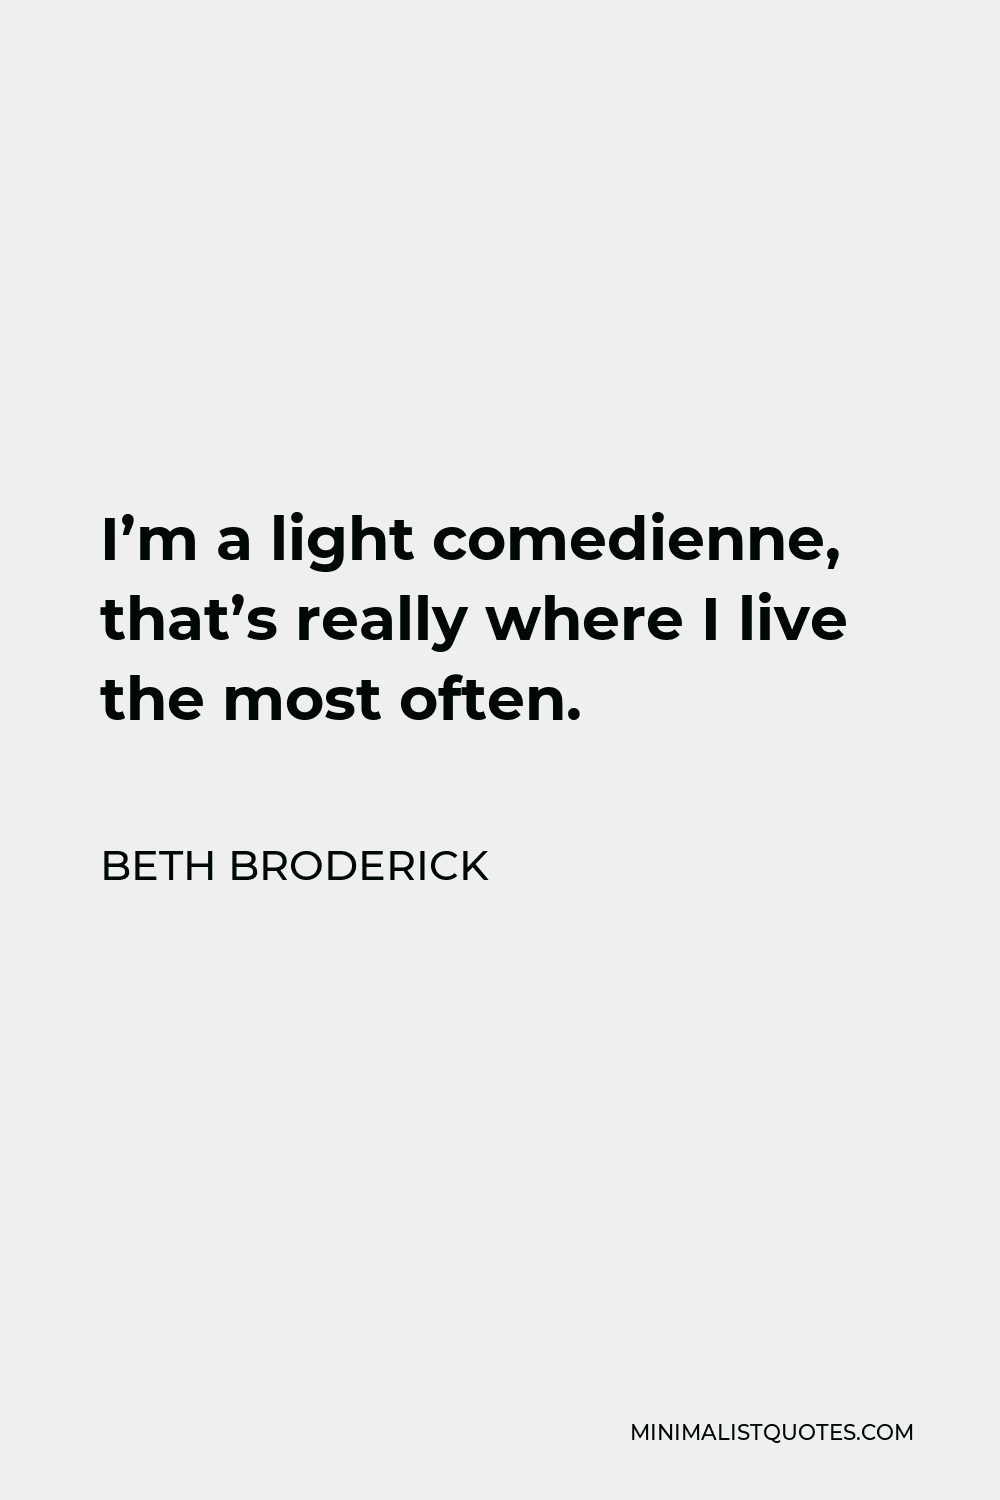 Beth Broderick Quote - I’m a light comedienne, that’s really where I live the most often.